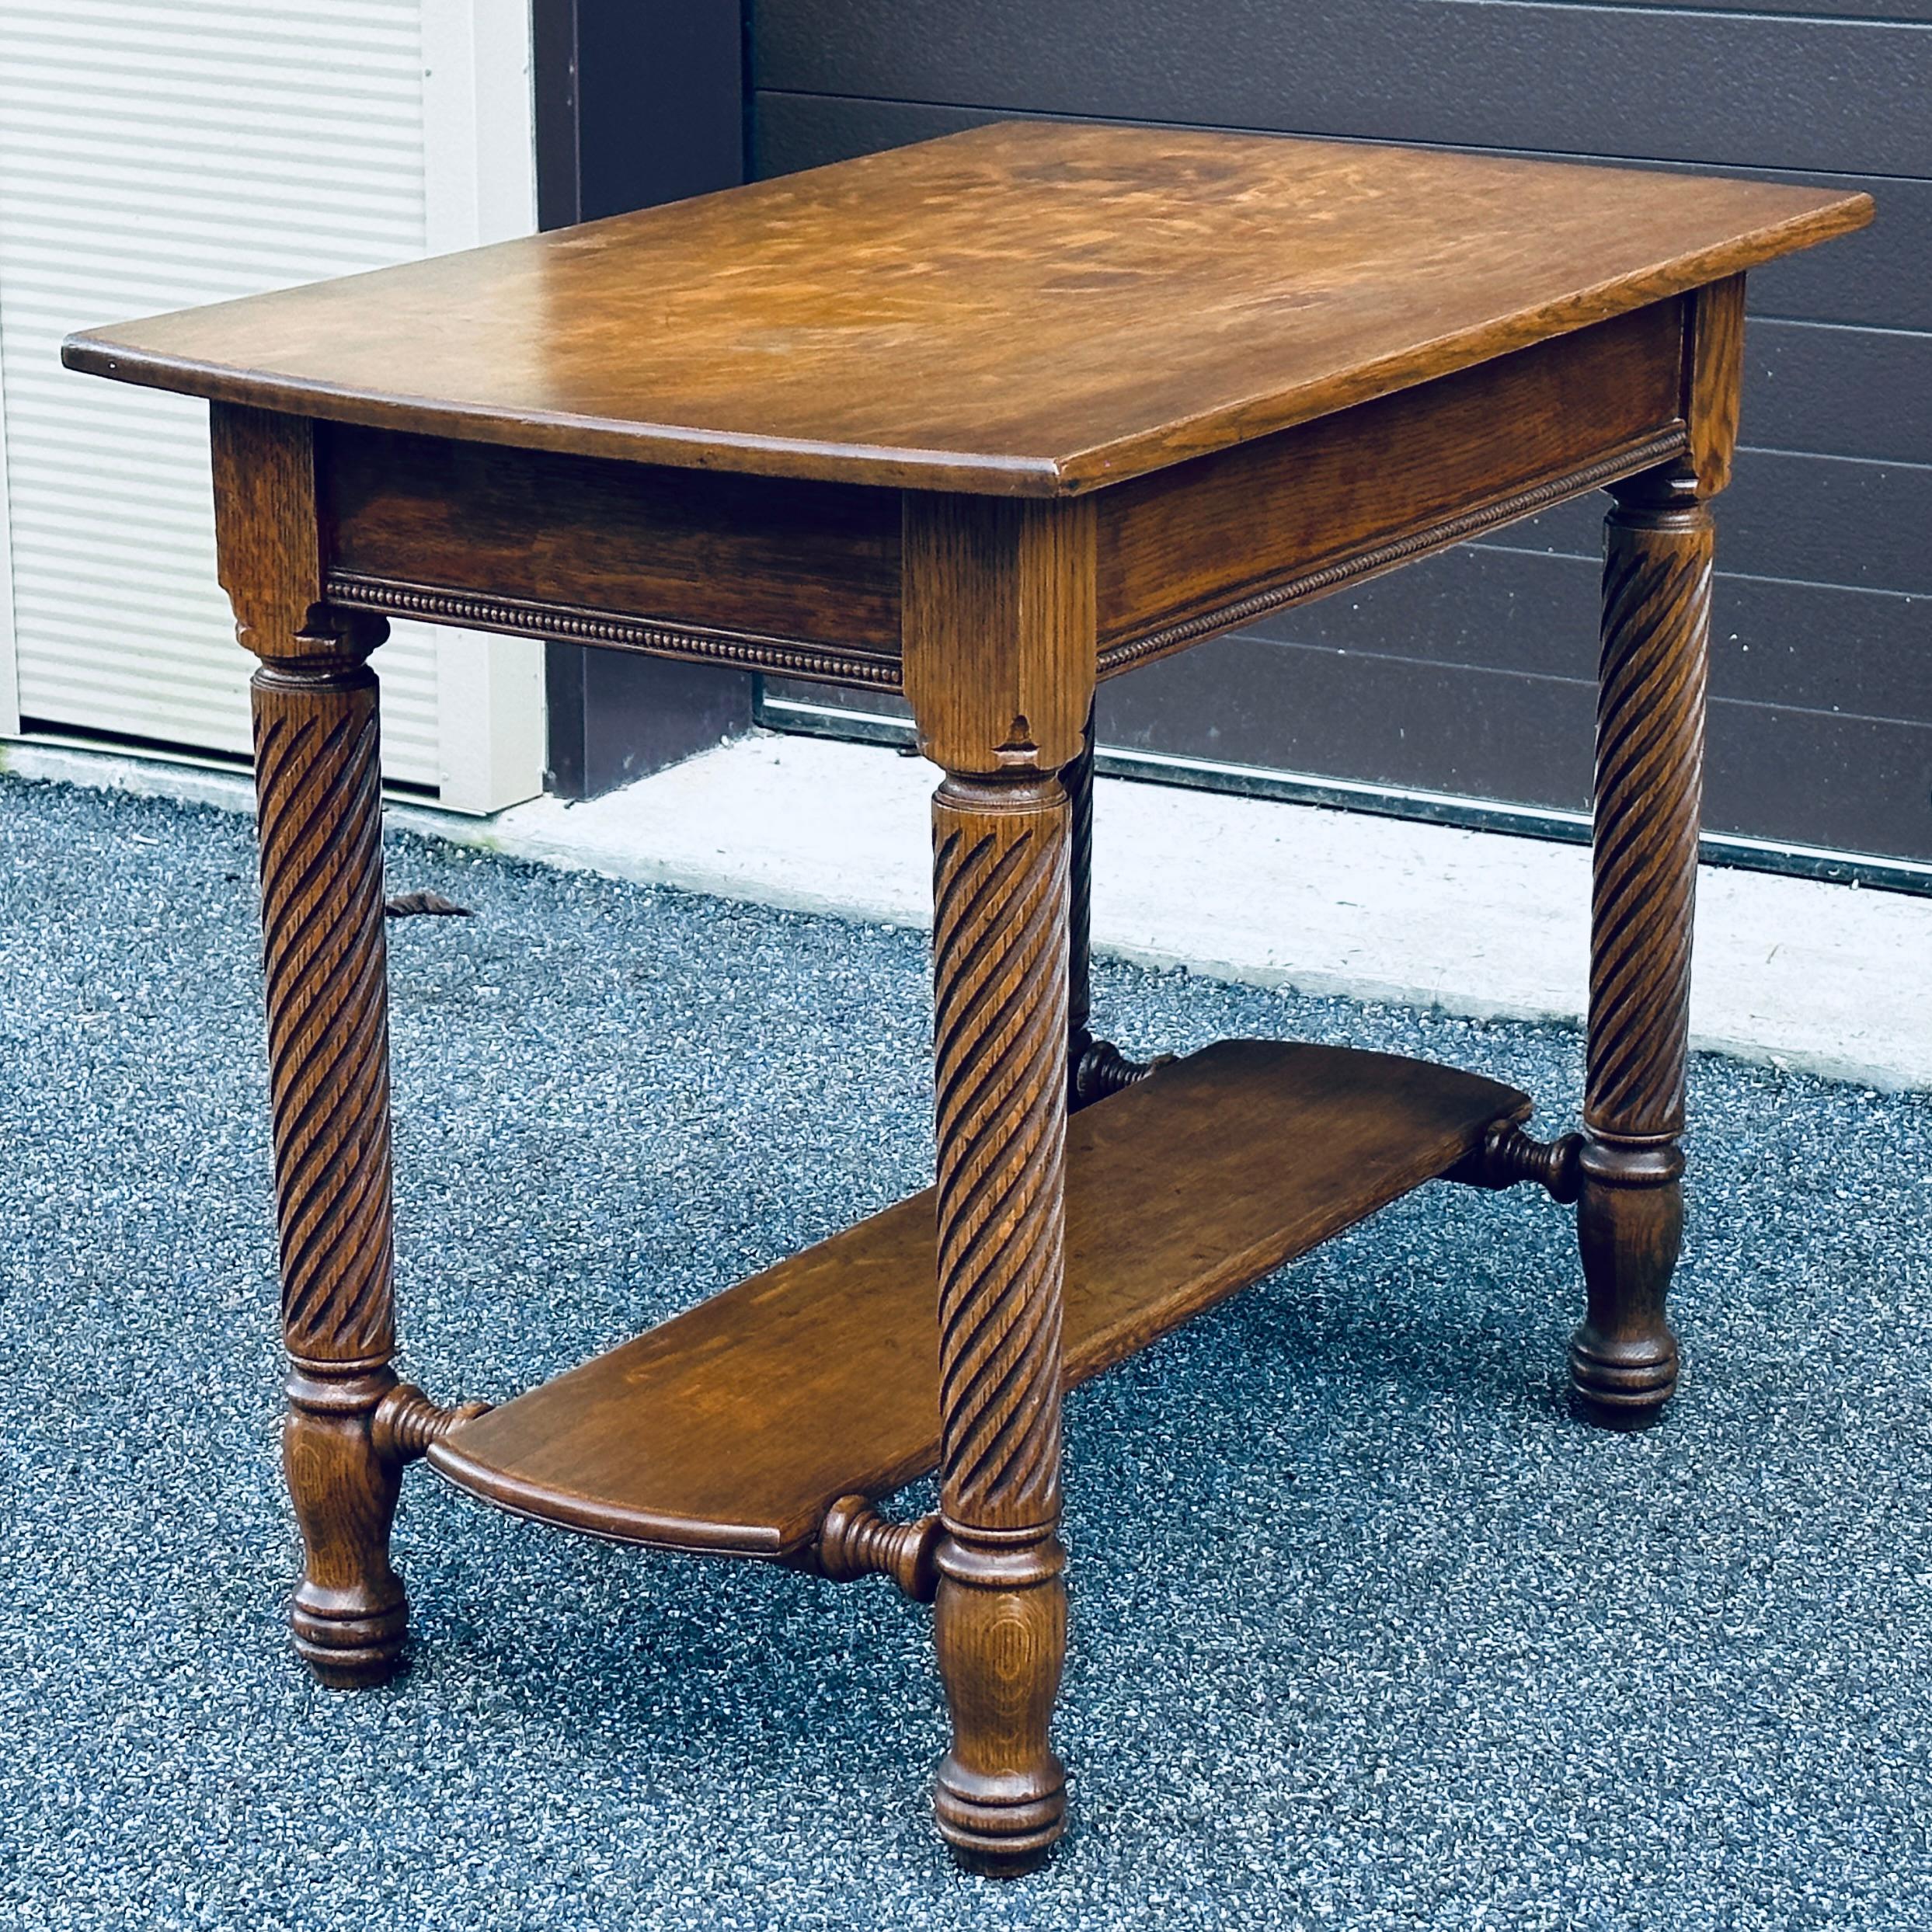 Victorian Antique Quartersawn Solid Oak Library Table With Twist Legs & Drawer For Sale